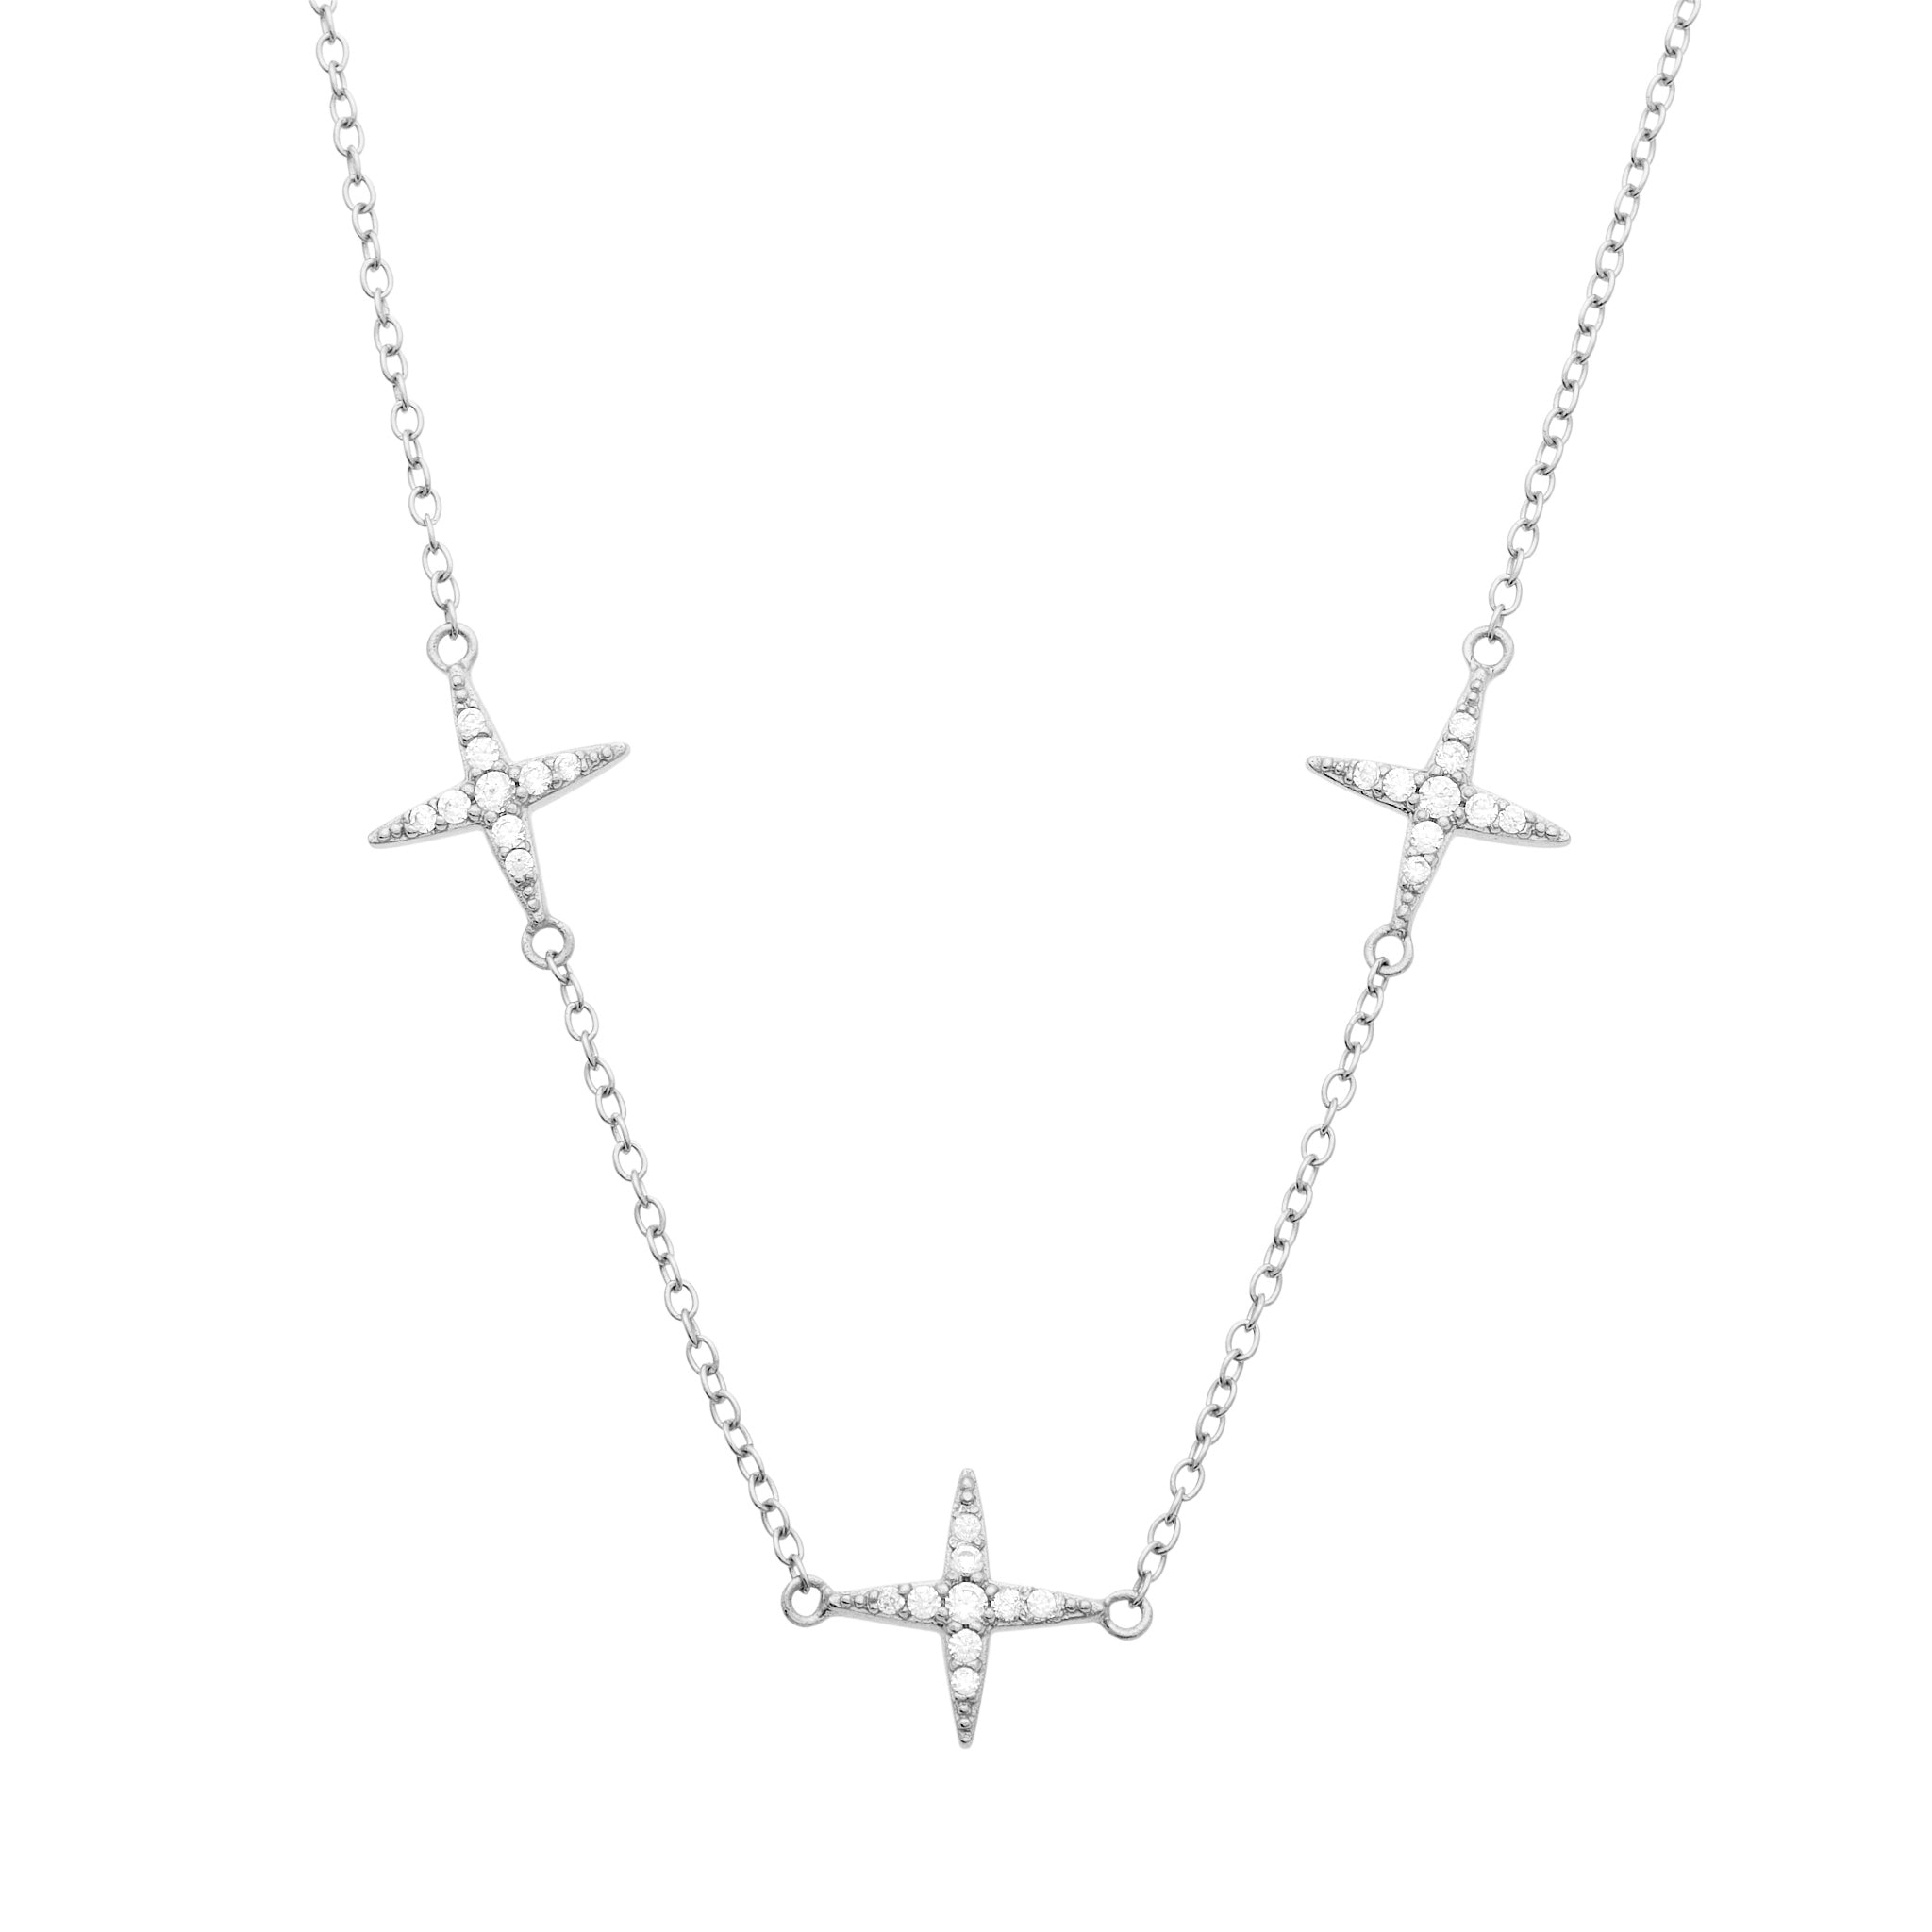 North Star Choker Necklace Silver